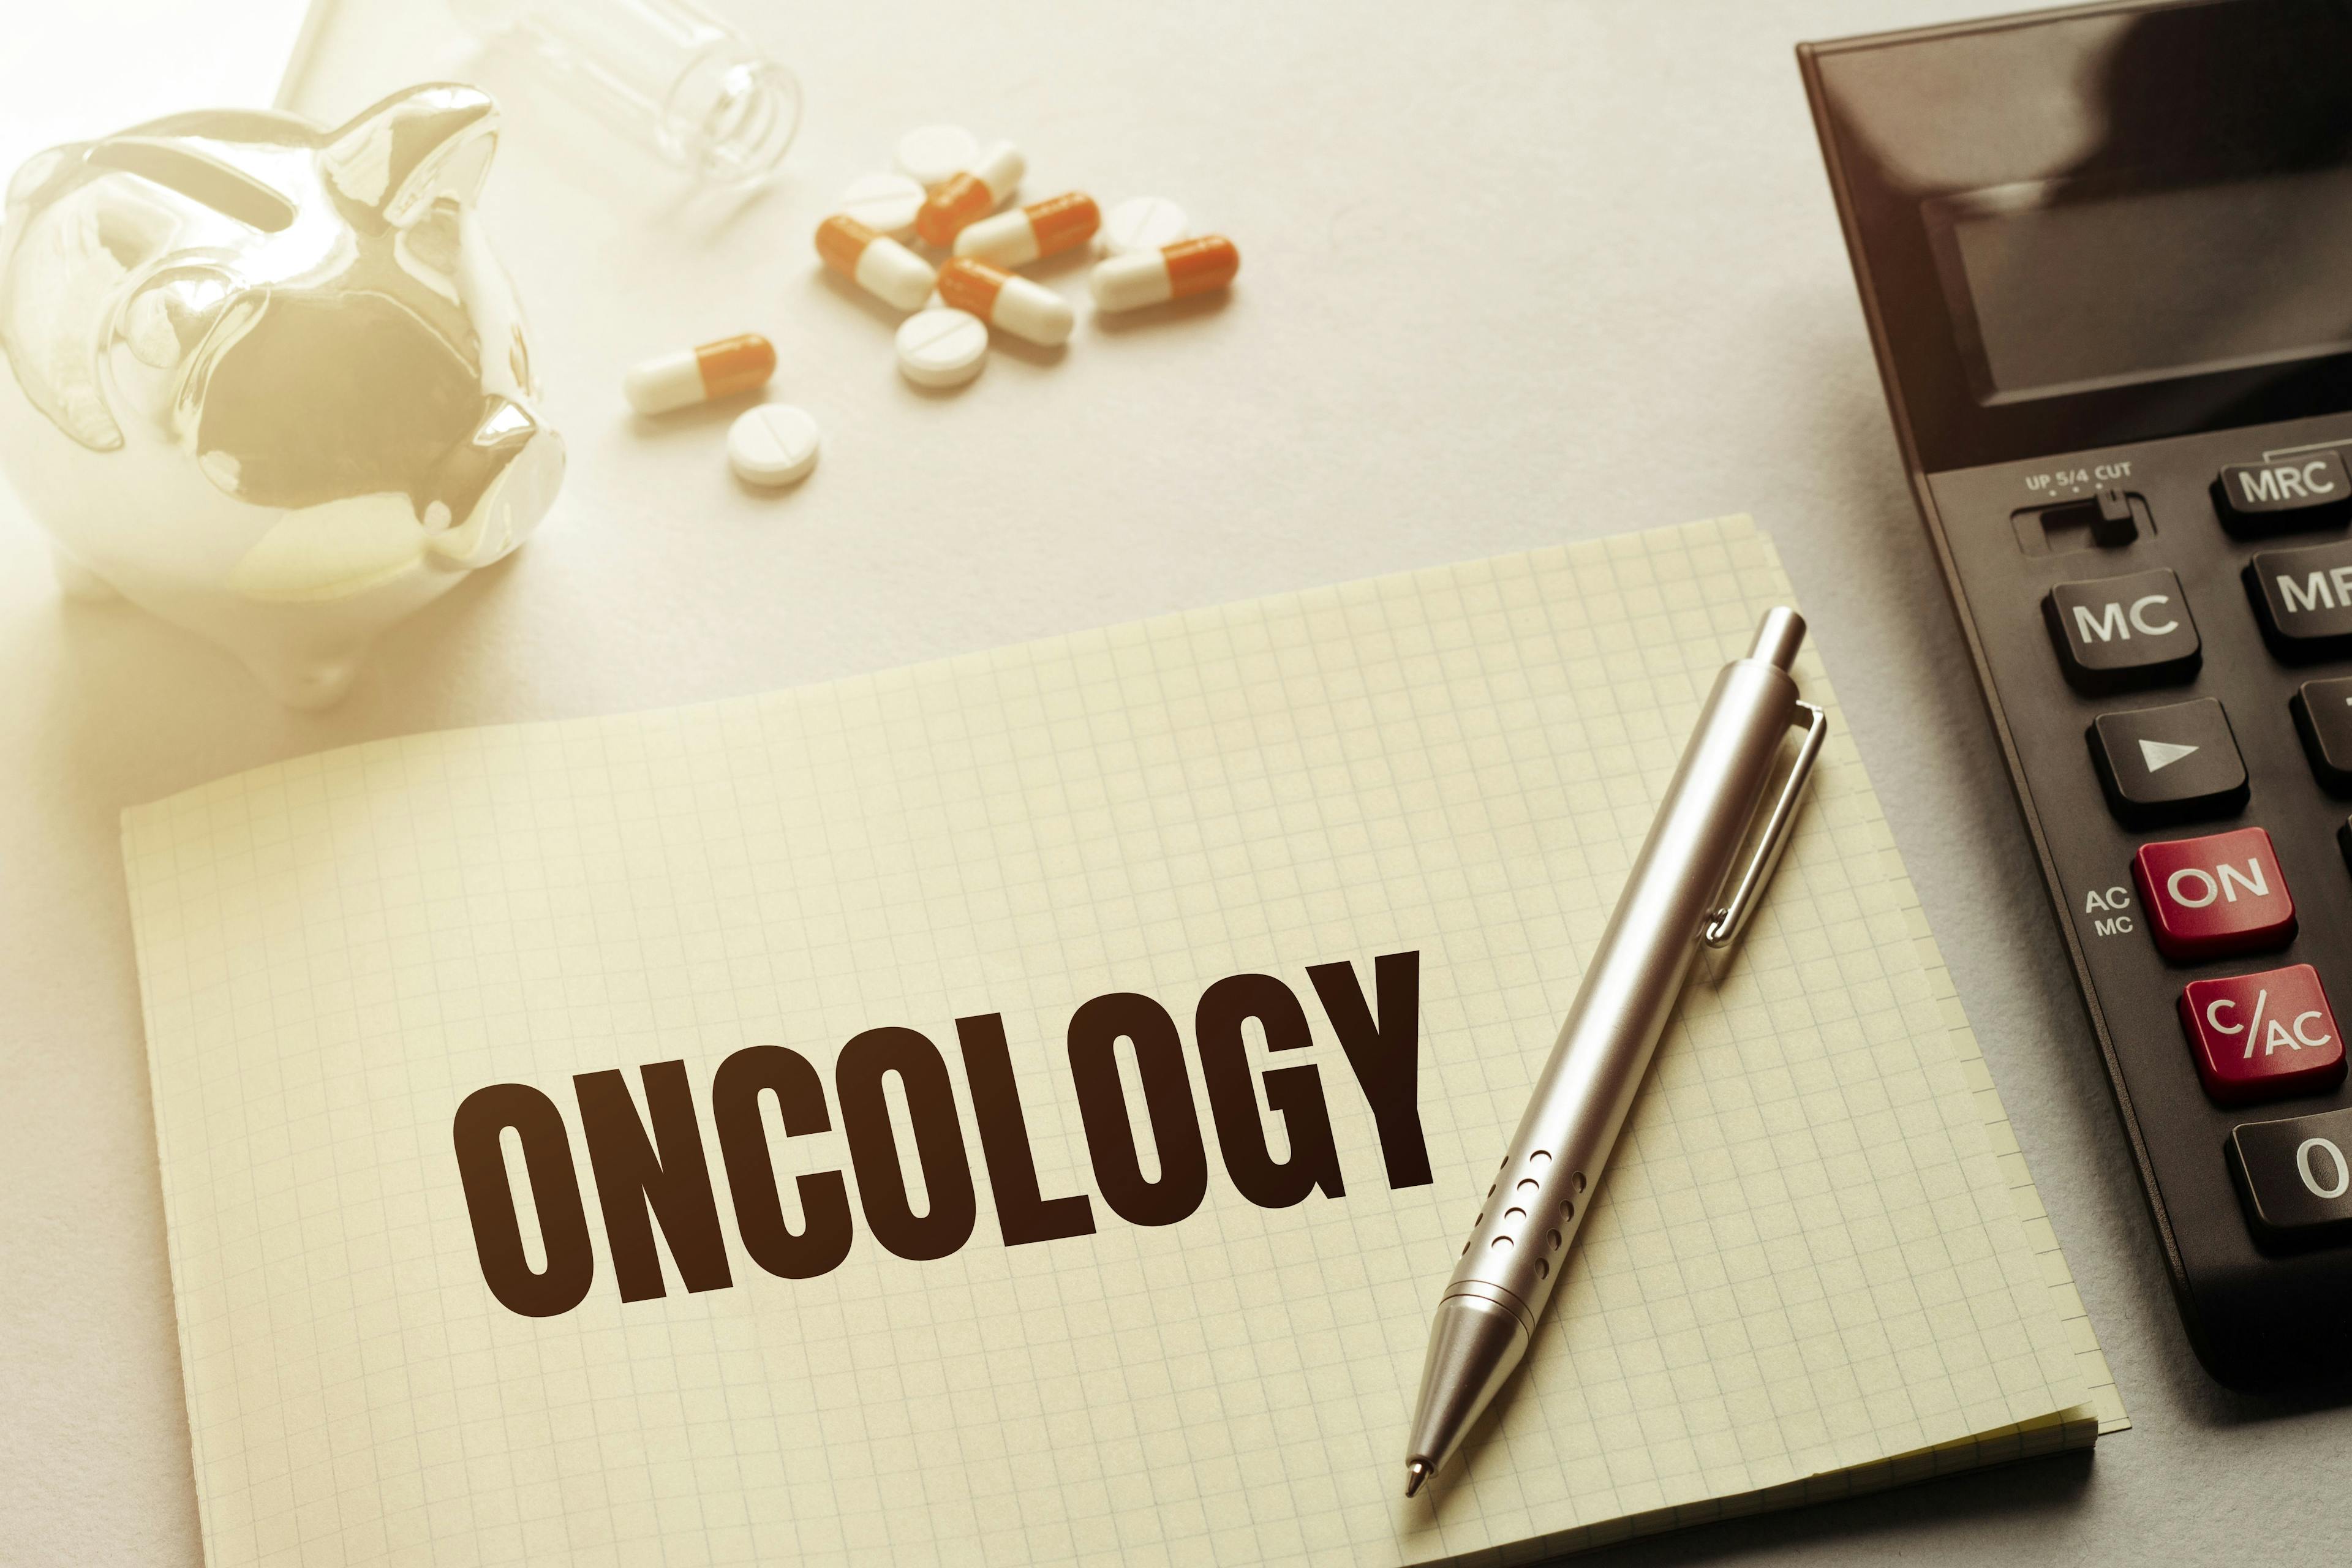 Oncology Care Model is a "debacle," says healthcare policy expert